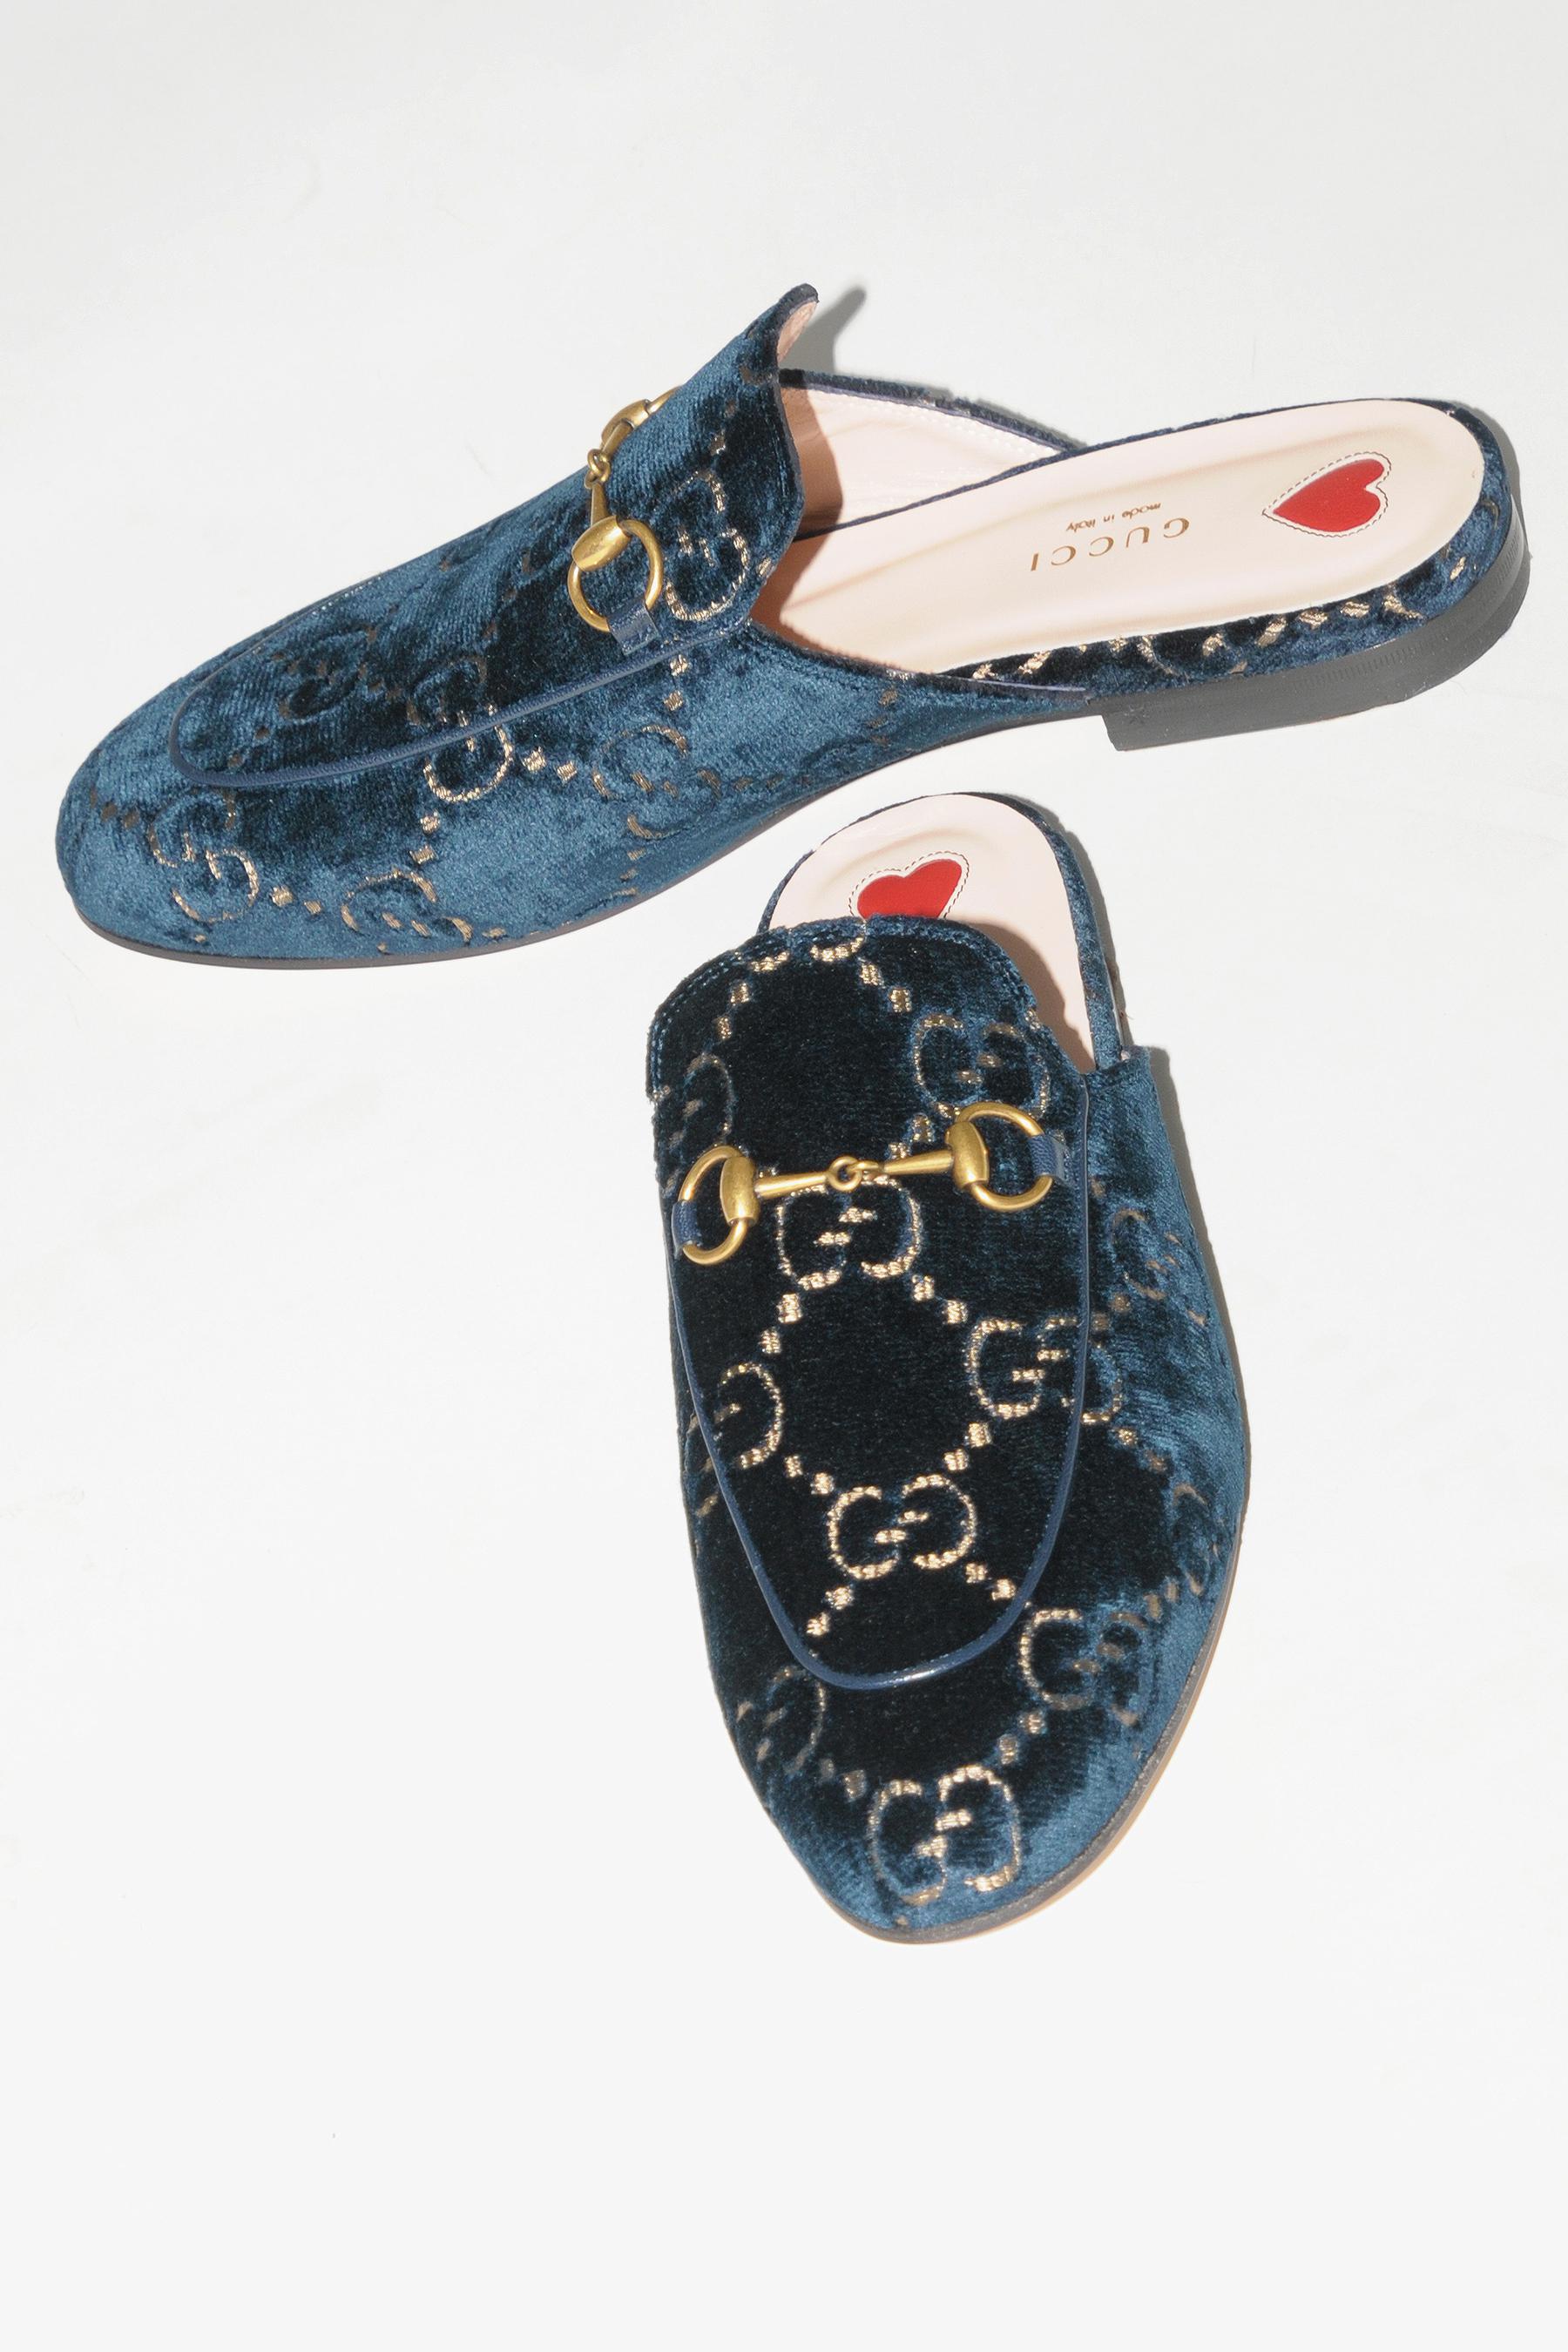 gucci princetown navy, OFF 76%,www 